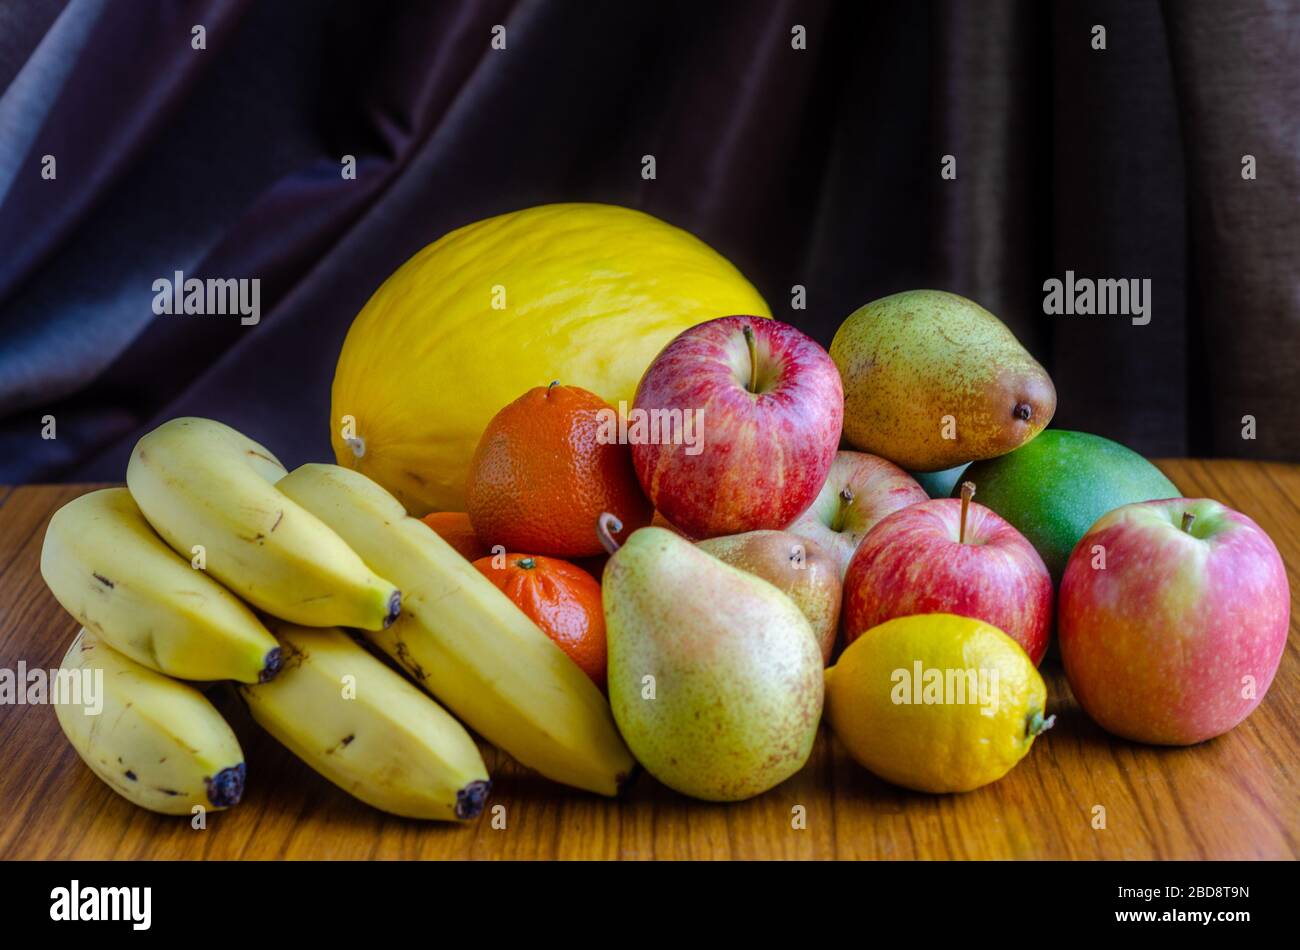 A still life shot with an assortment of different types of fruit including apples, mandarin oranges, melon, banana, pears, mango, lemon Stock Photo